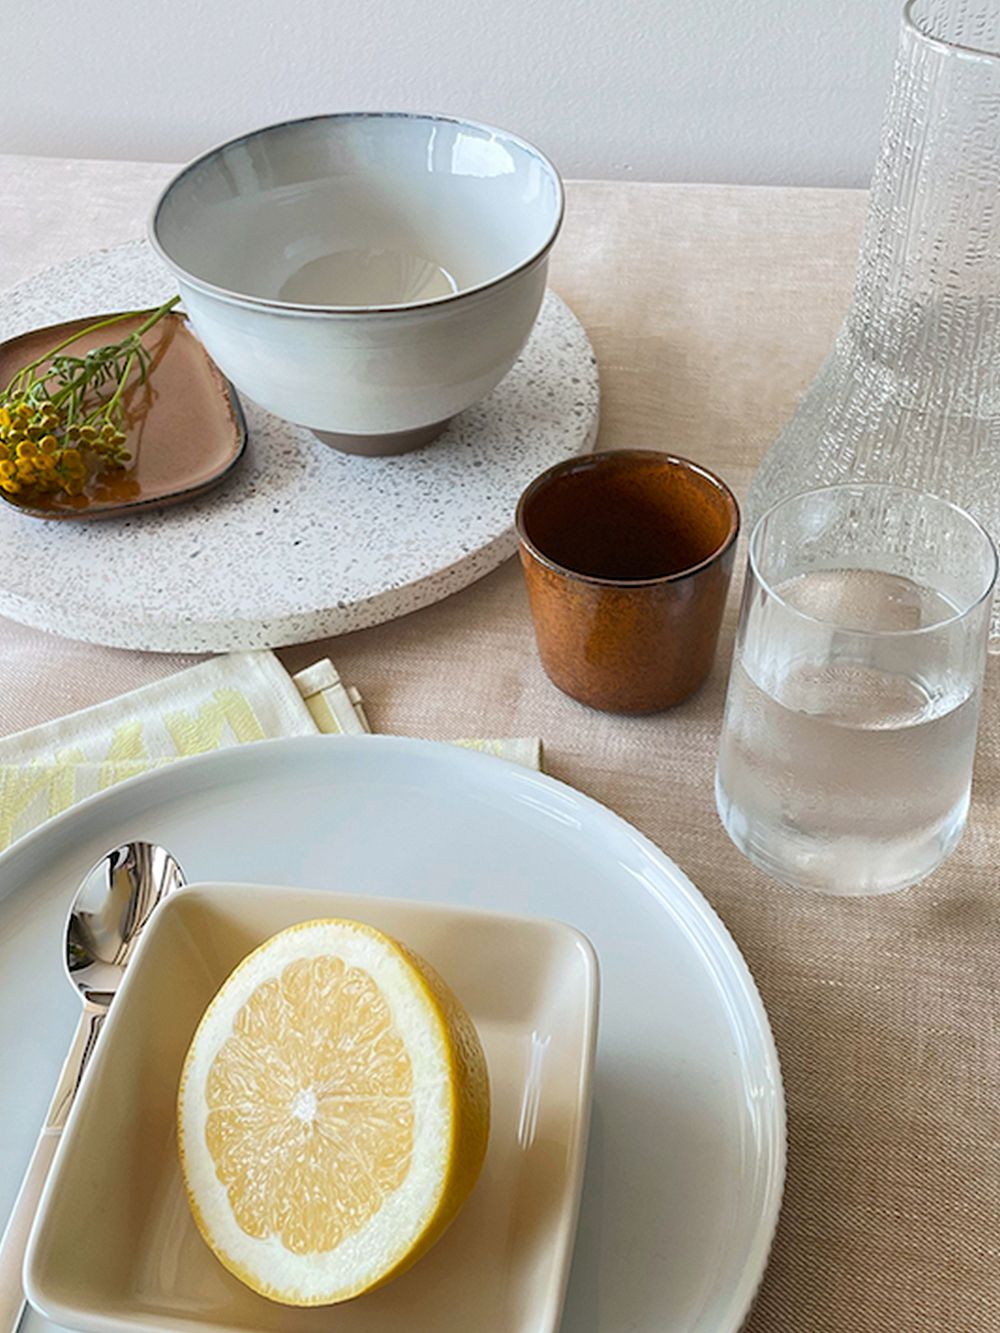 An image featuring, among others, the Bernadotte porcelain plate and Bernadotte crystal glass by Georg Jensen, Lyngby Porcelin's Lyngby vase, and Gense's Nobel spoon in a table setting, as part of the dining room decor. 